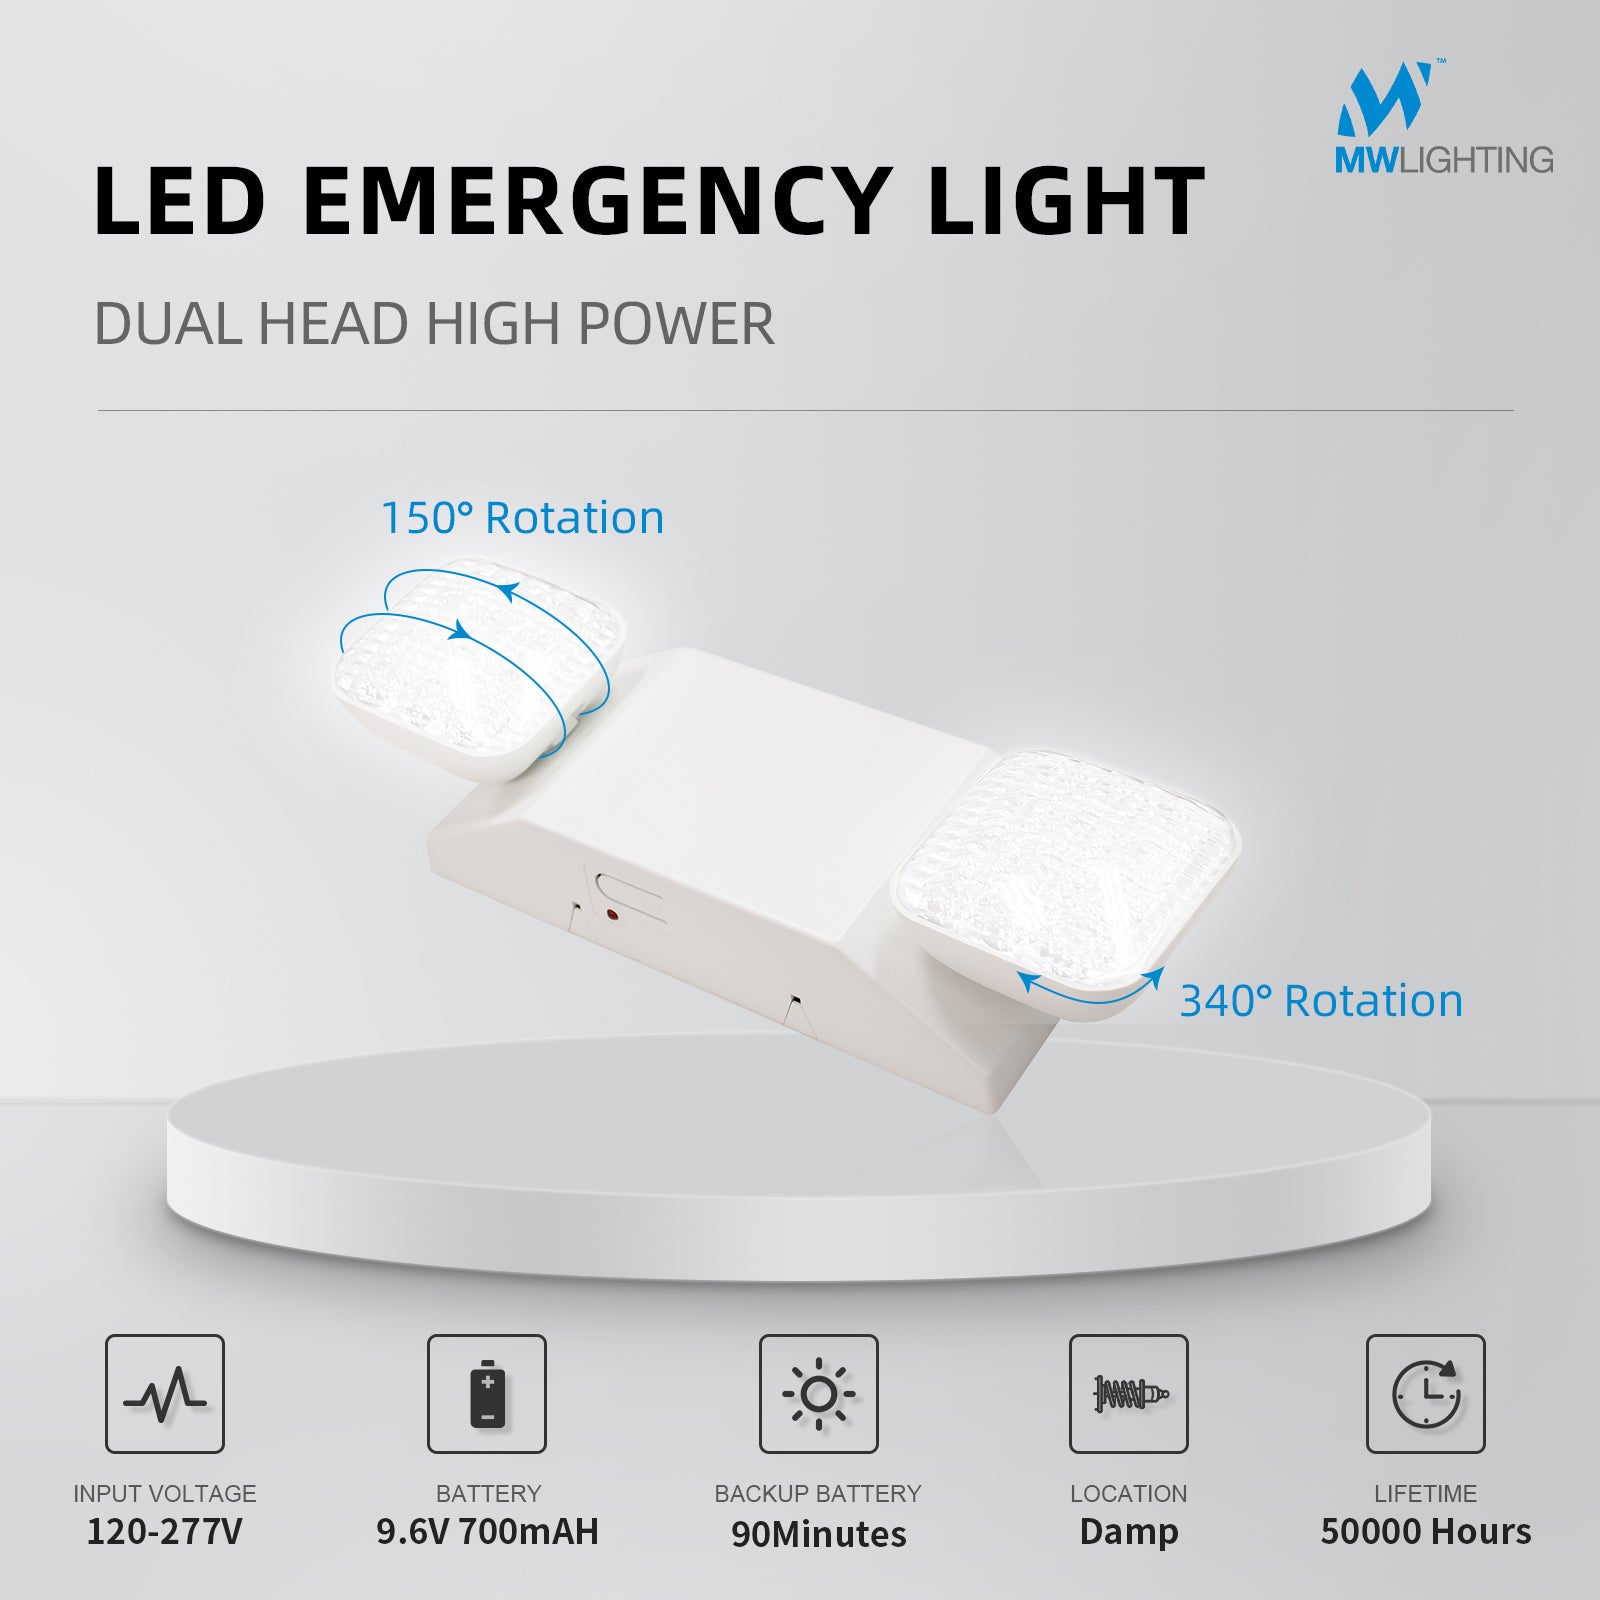 Two adjustable LED head bright emergency light-90 minute battery